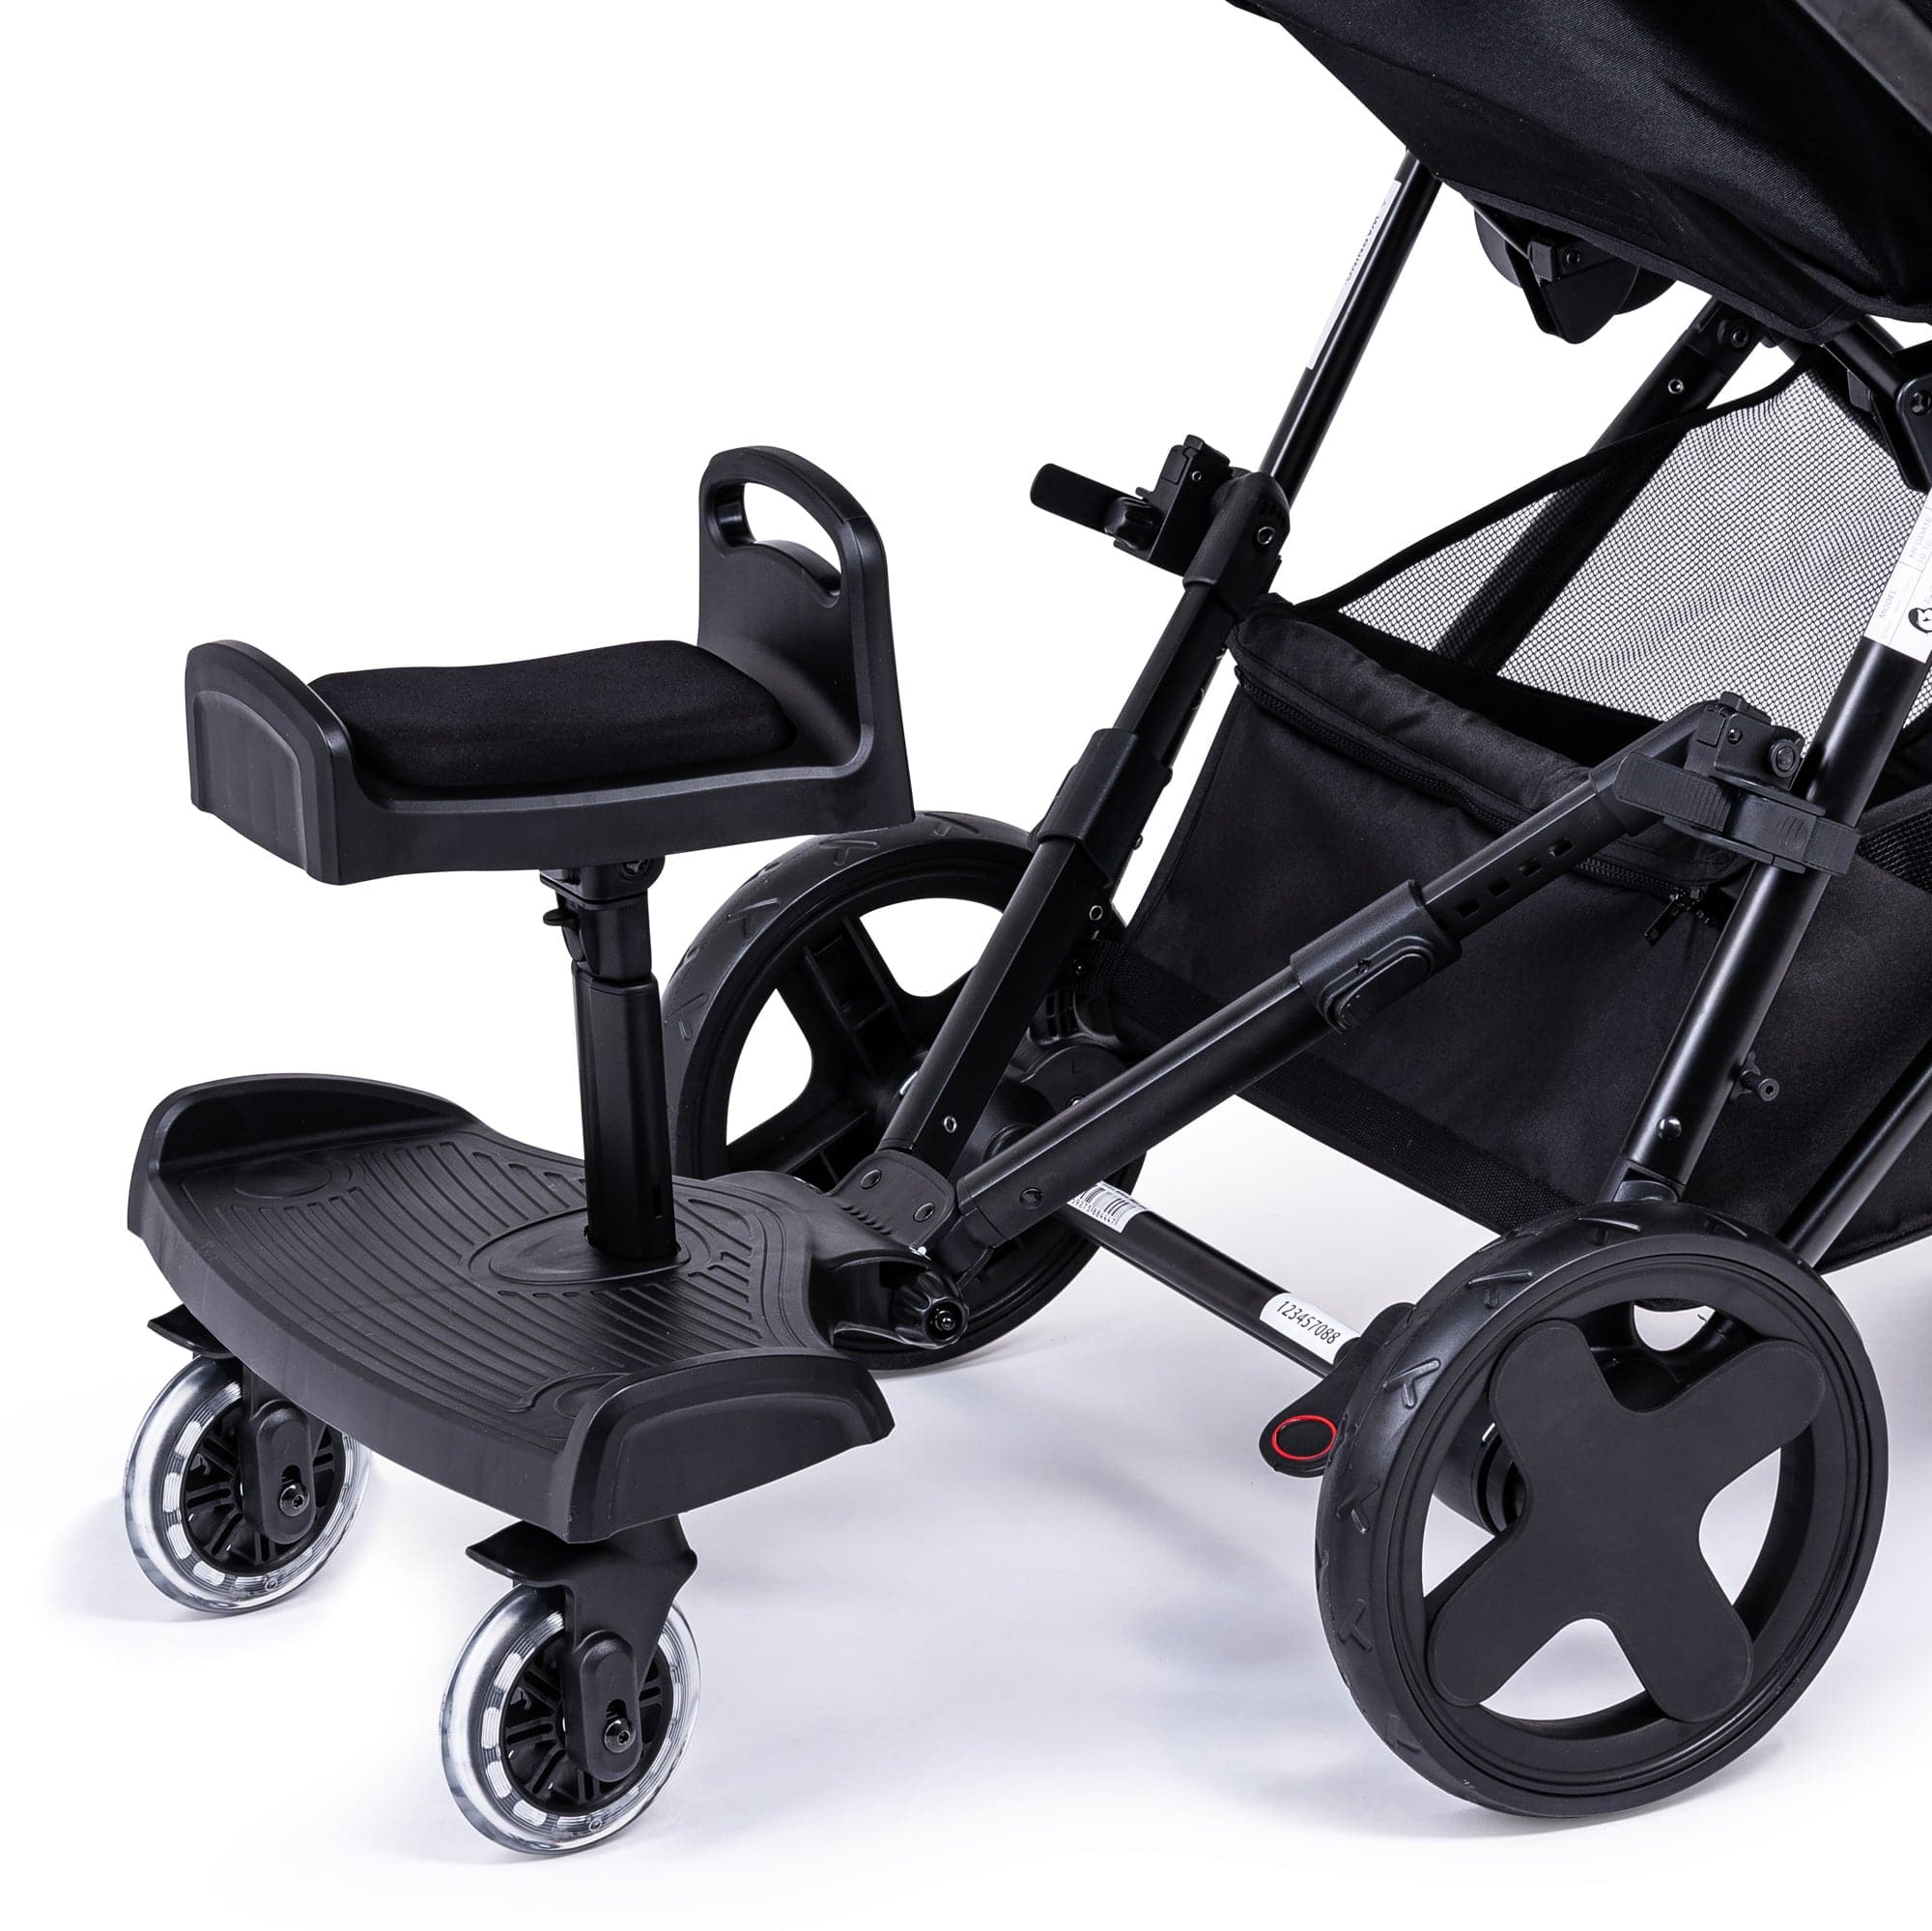 Ride On Board with Saddle Compatible with Mountain Buggy - For Your Little One